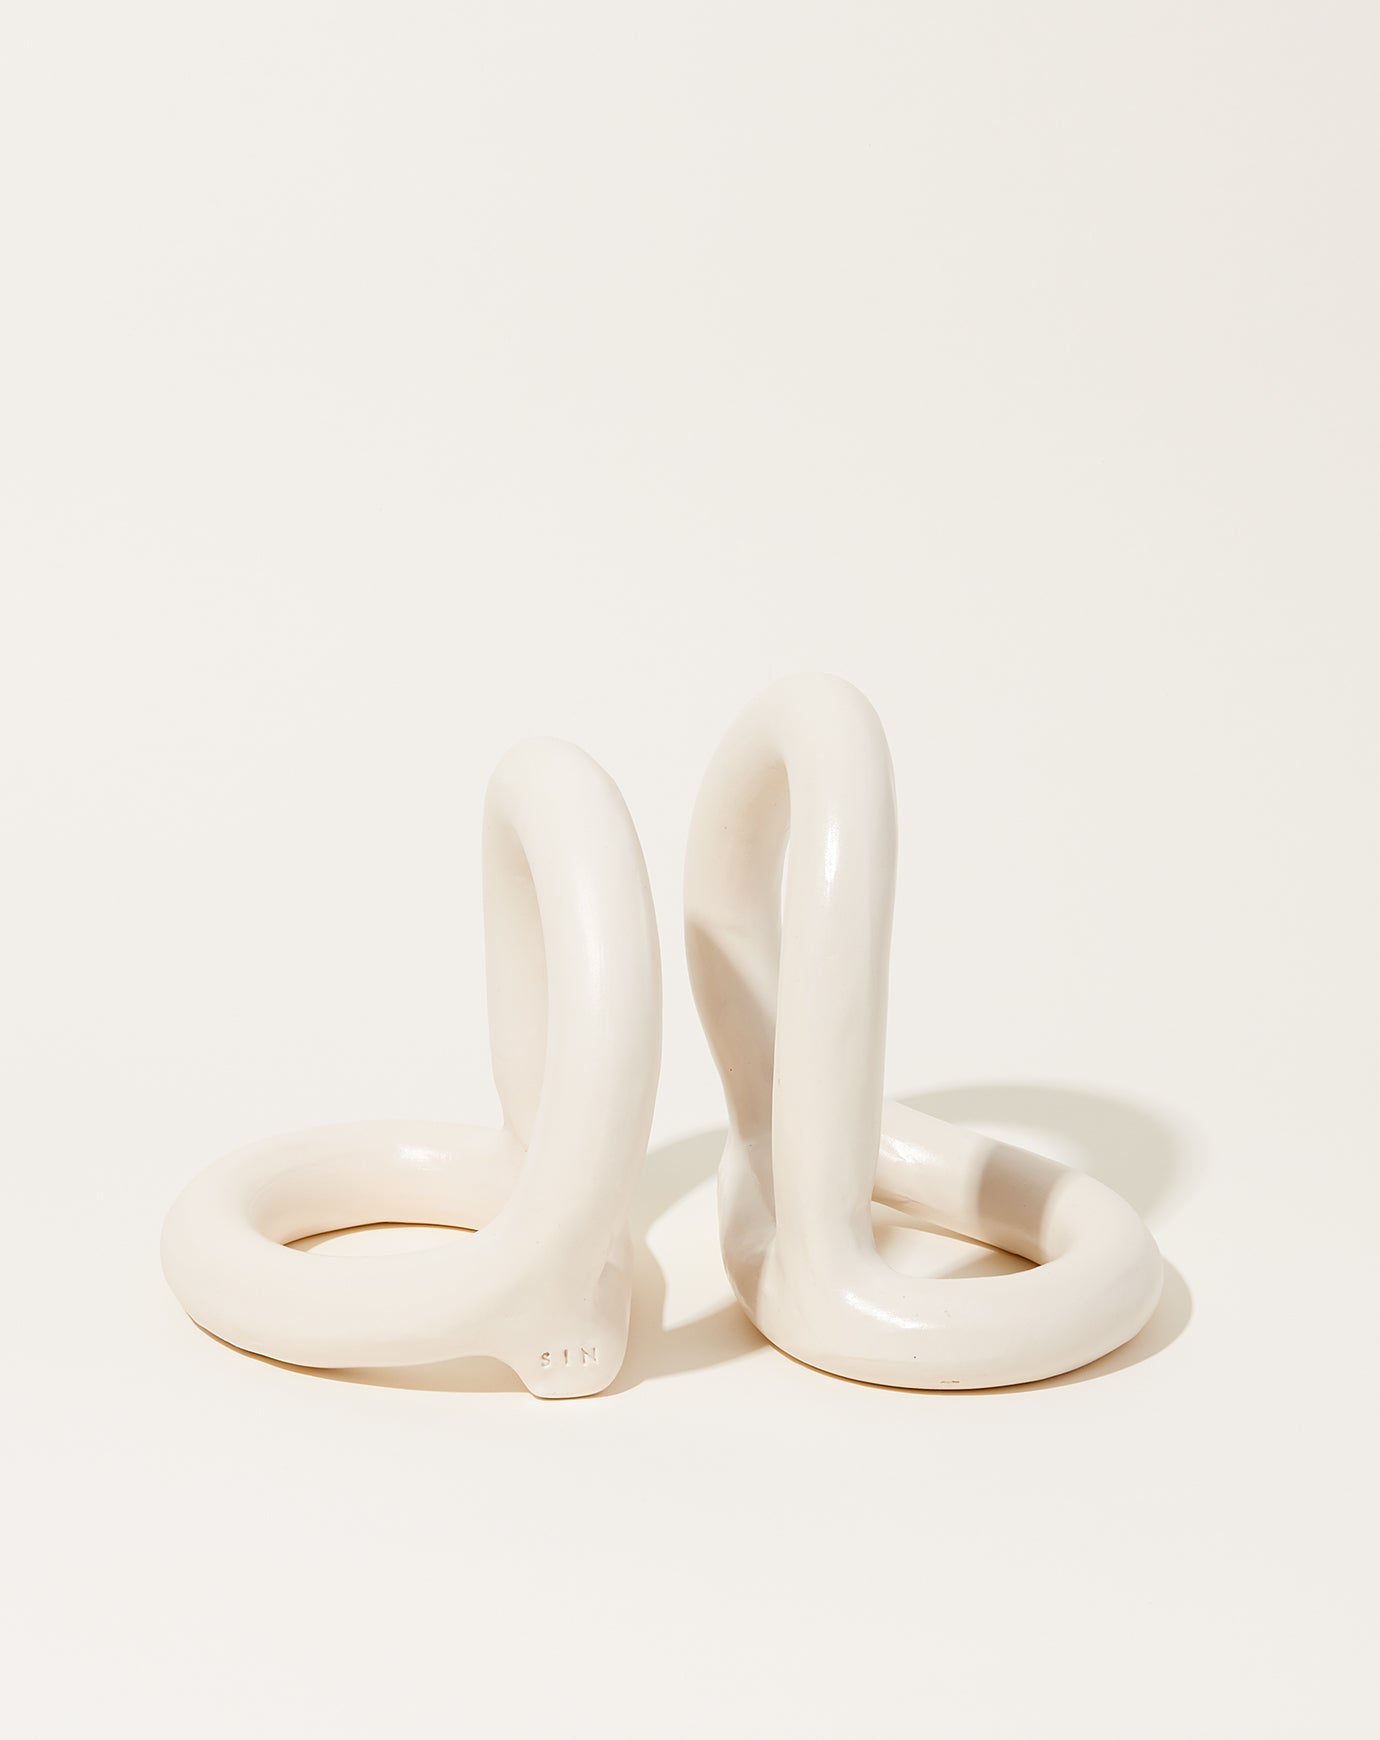 SIN Bacchus Bookends in White